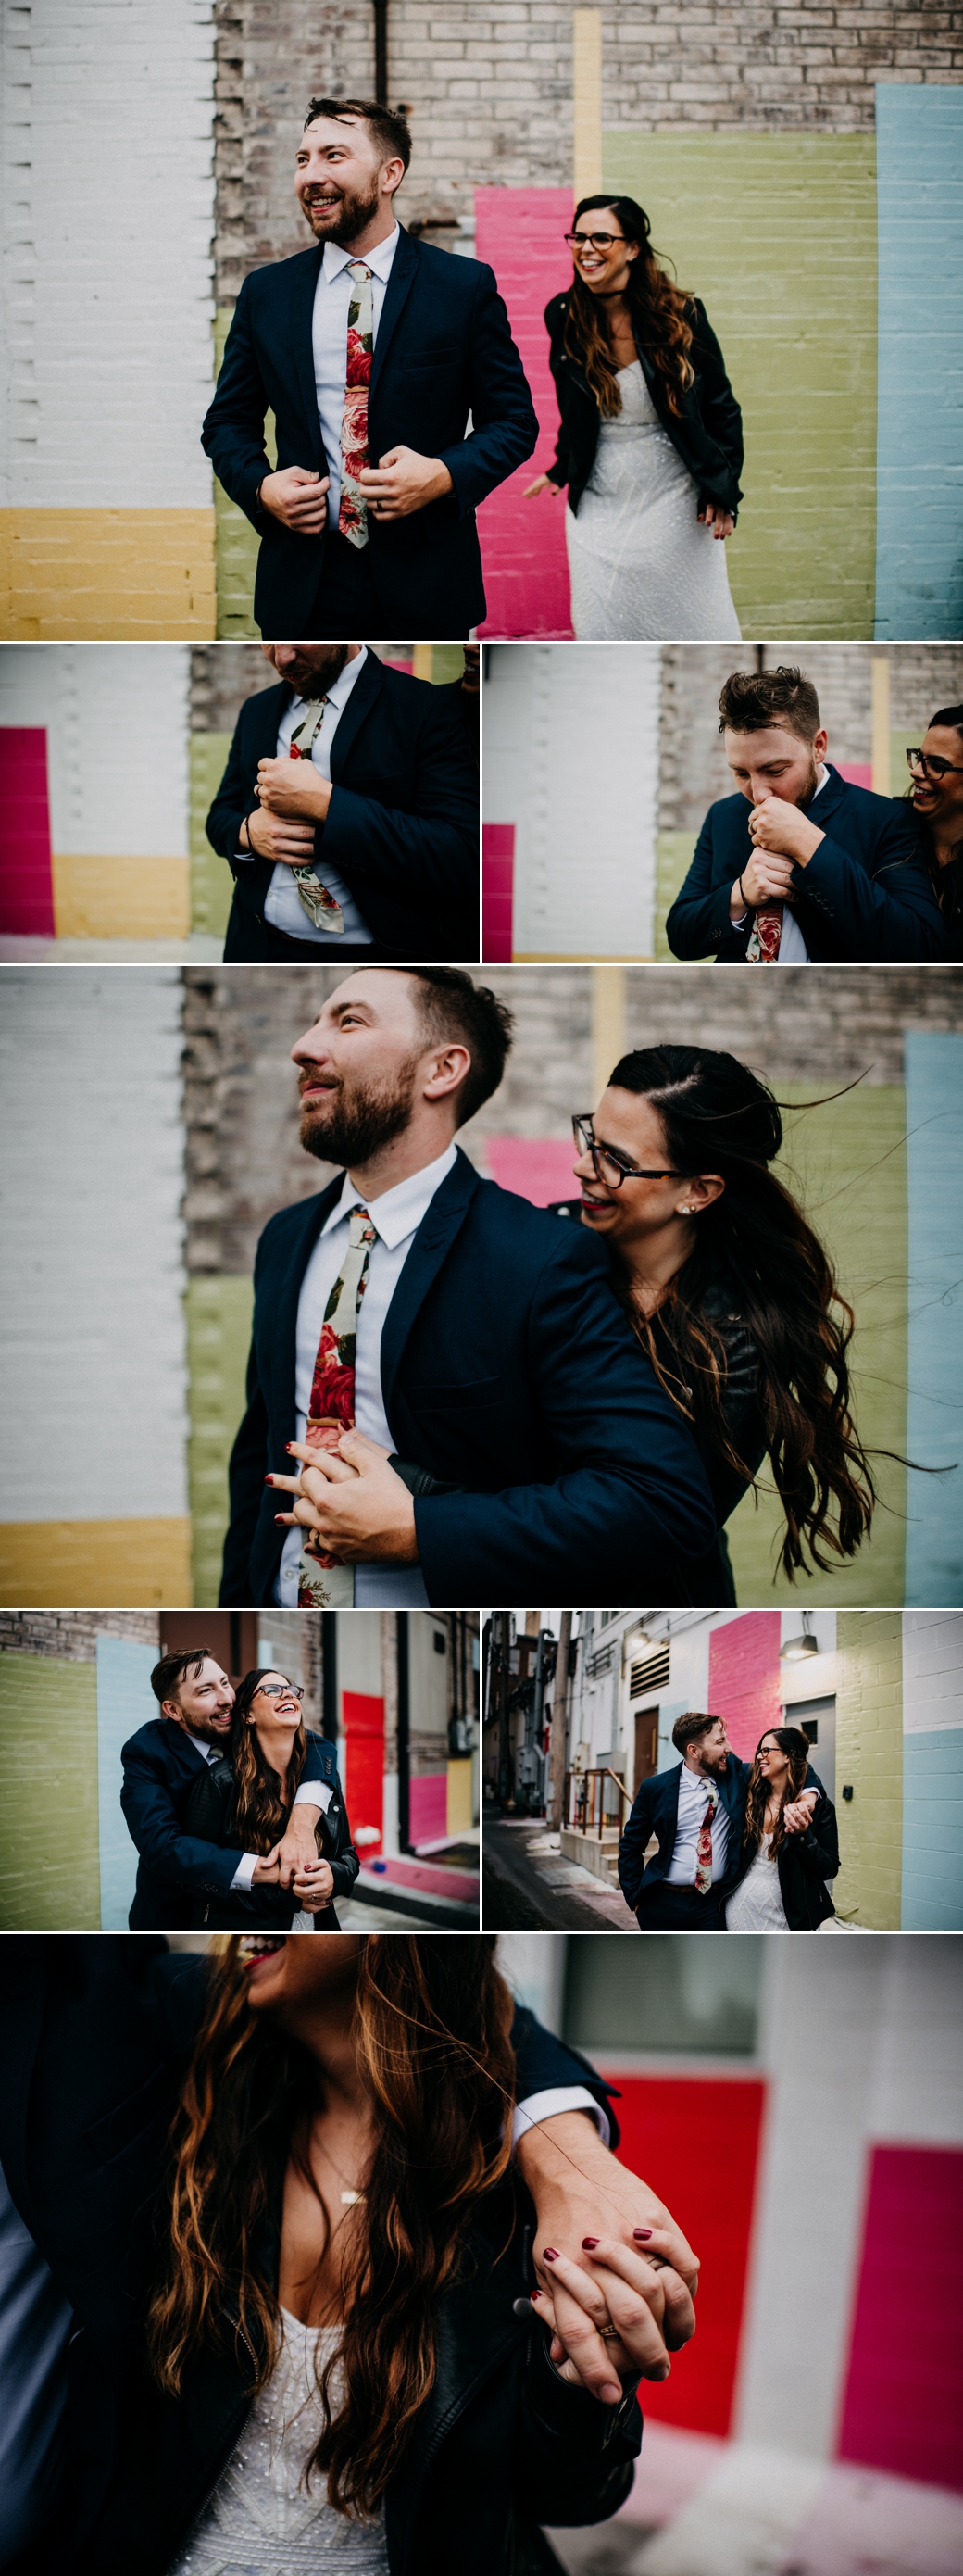 A collage of photos of a bride and groom splashing in puddles and making the best of their rainy day wedding photos in St. Louis.